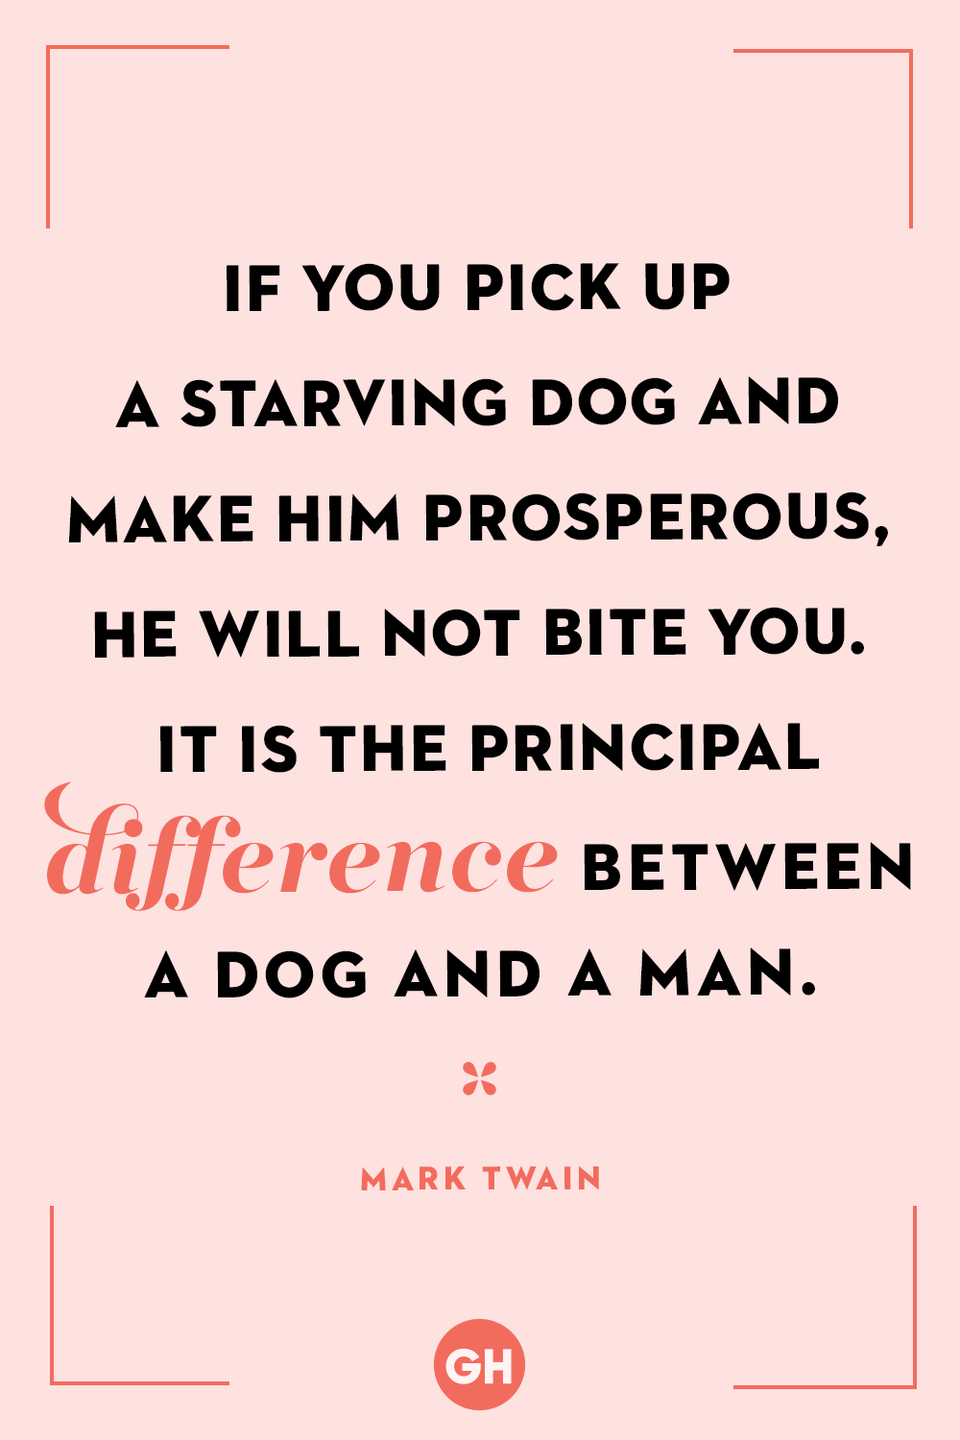 50 Dog Quotes That'll Inspire You to Hug Your Pup a Little Tighter